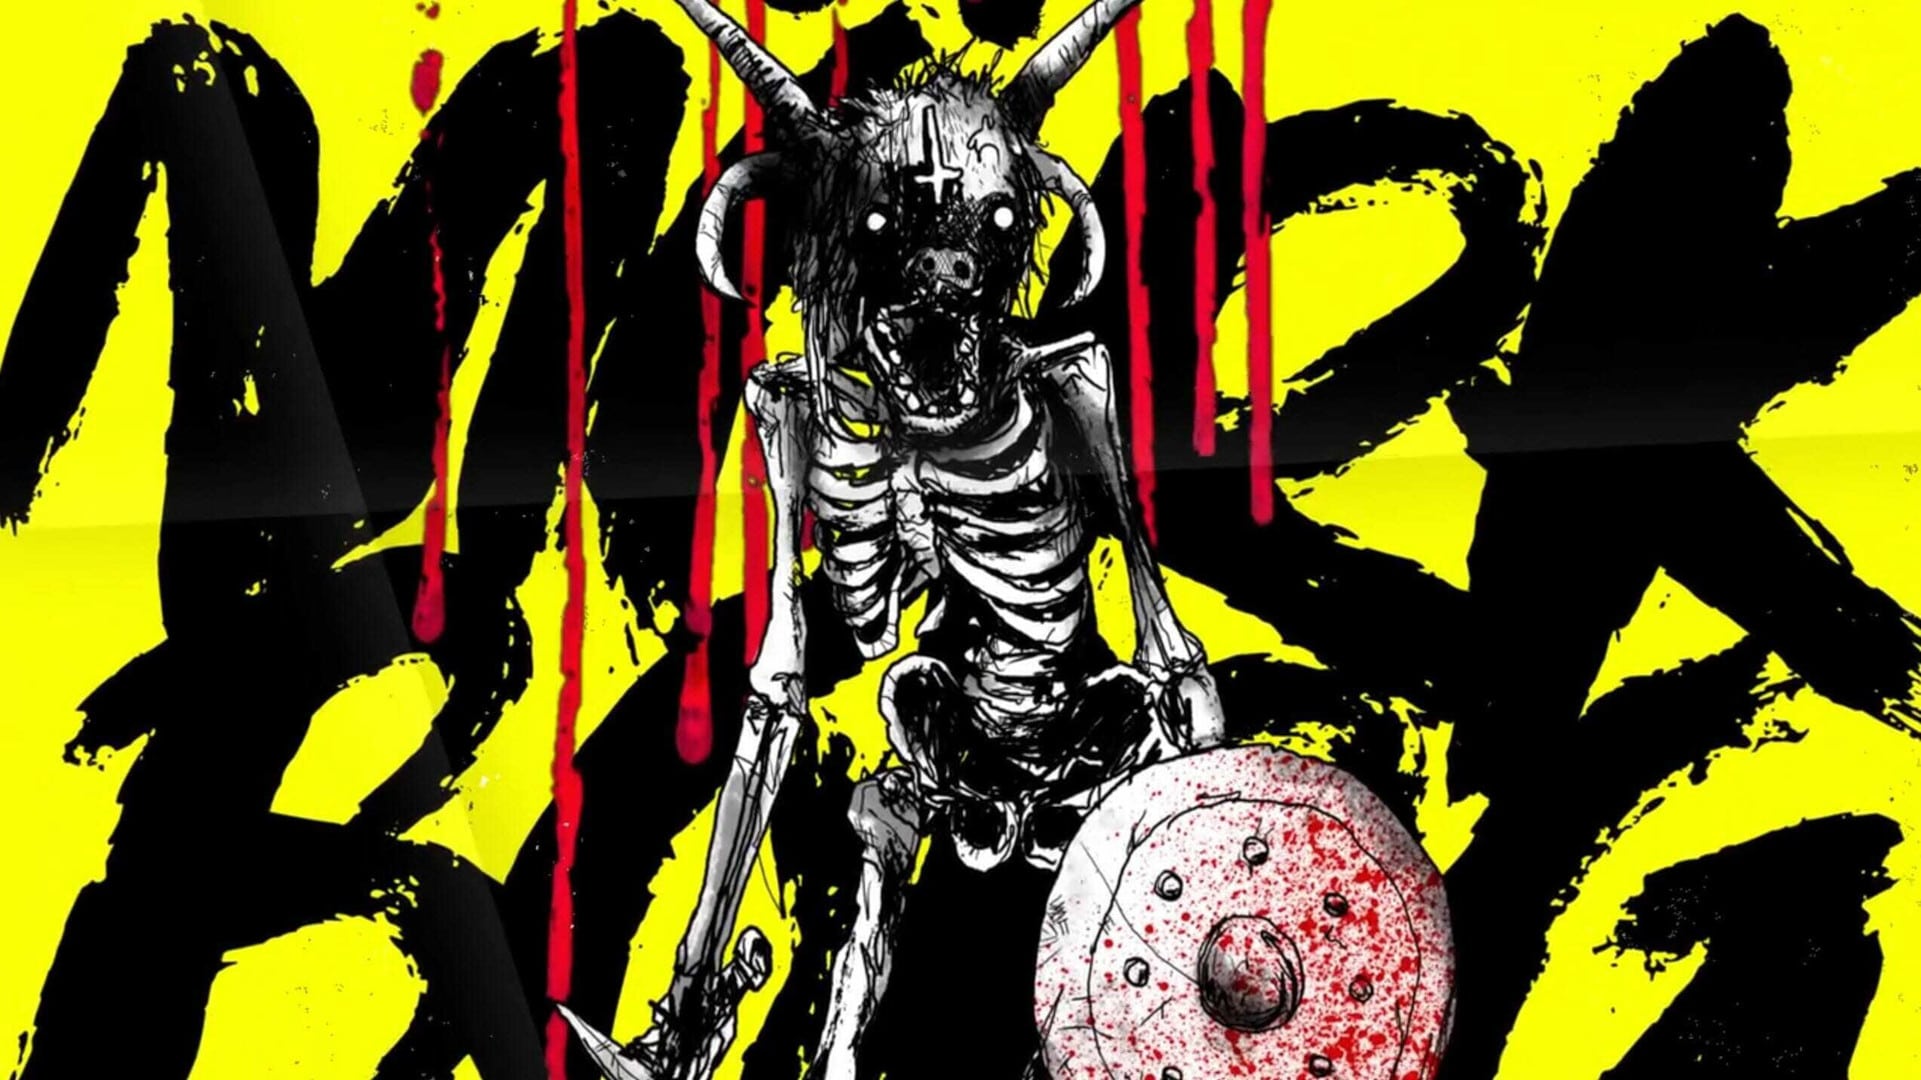 Image: MORK BORG a skeleton stands with a simple shield against a stark yellow background